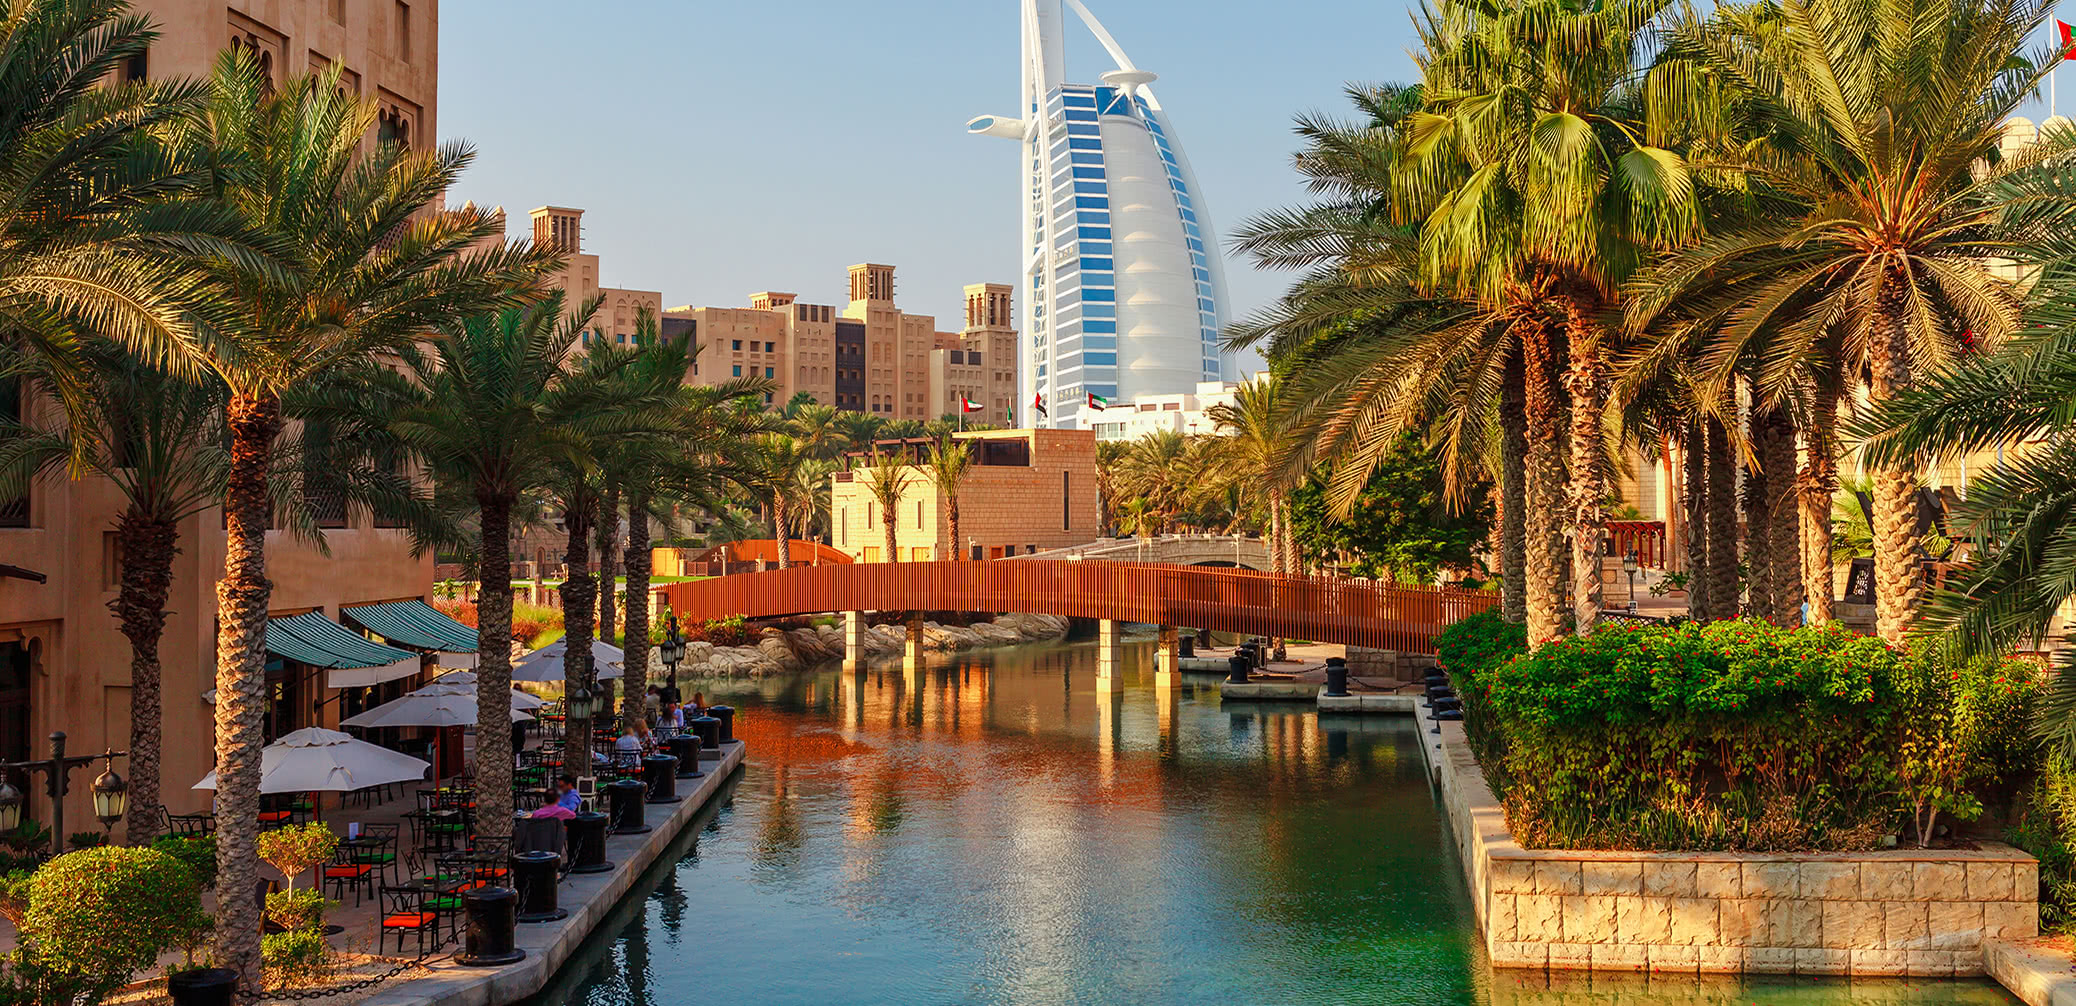 Which Is The Best Jumeirah Hotel In Dubai?